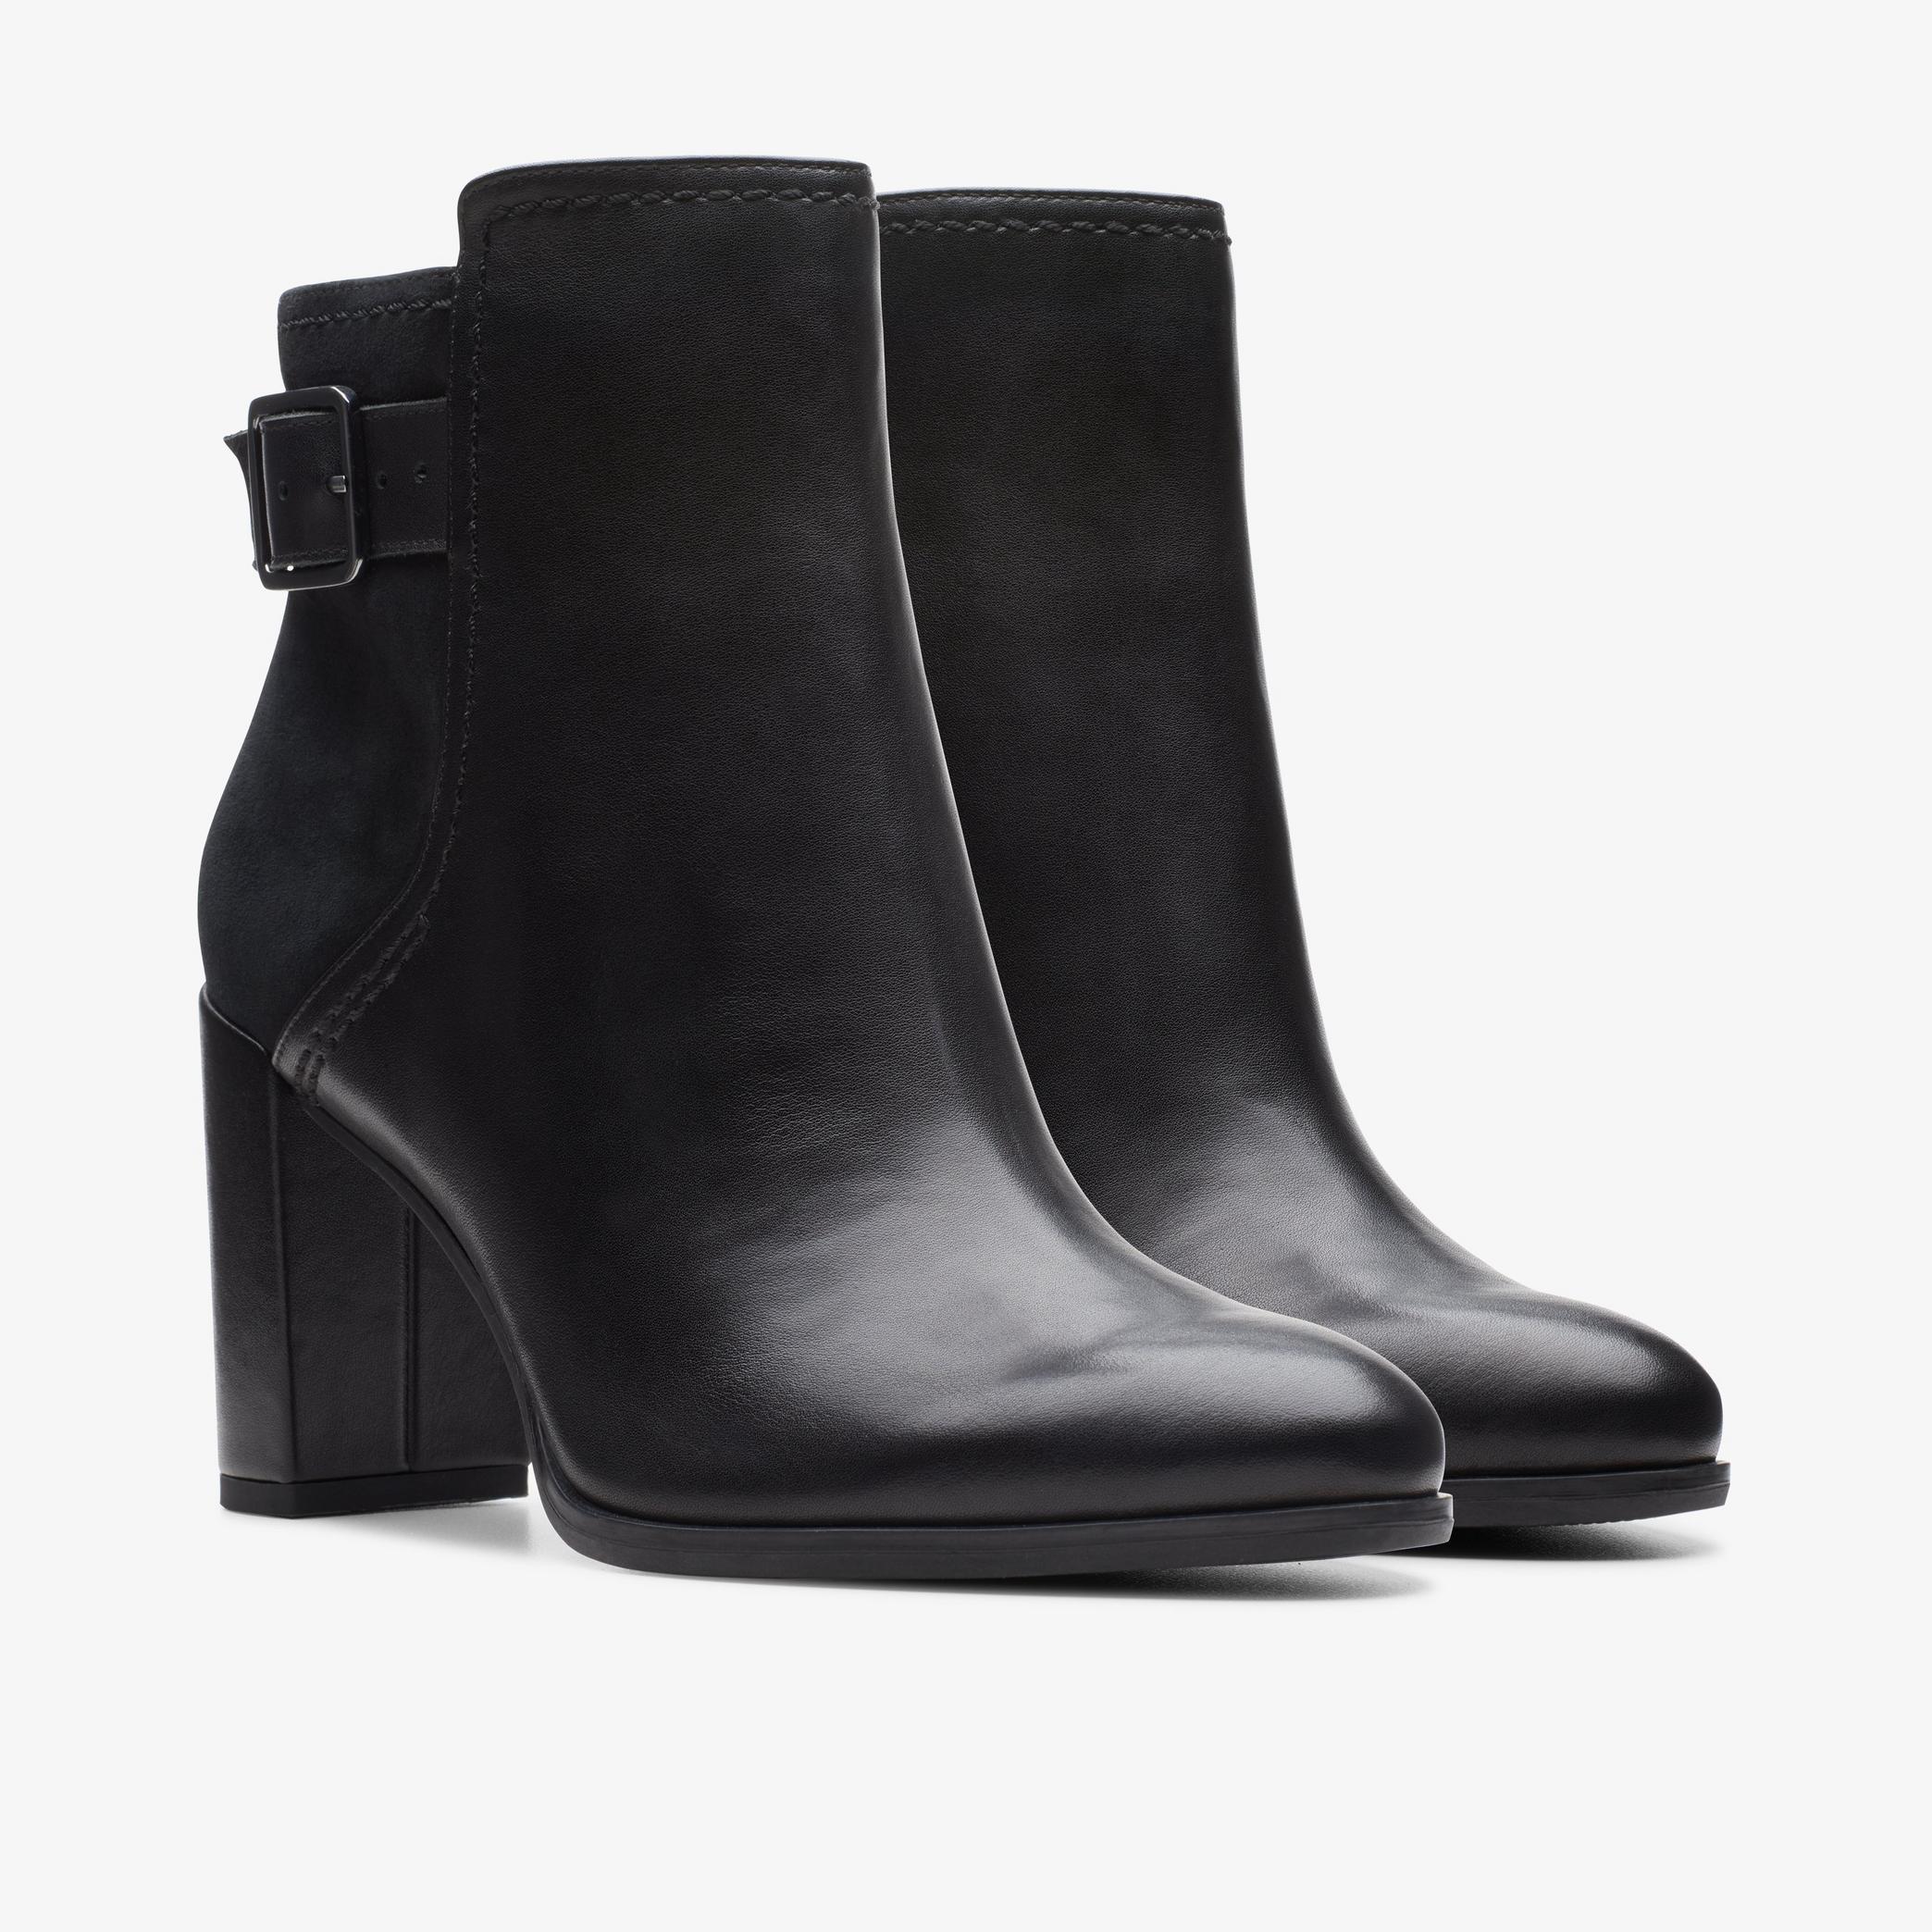 Freva 85 Buckle Black Leather Ankle Boots, view 5 of 8